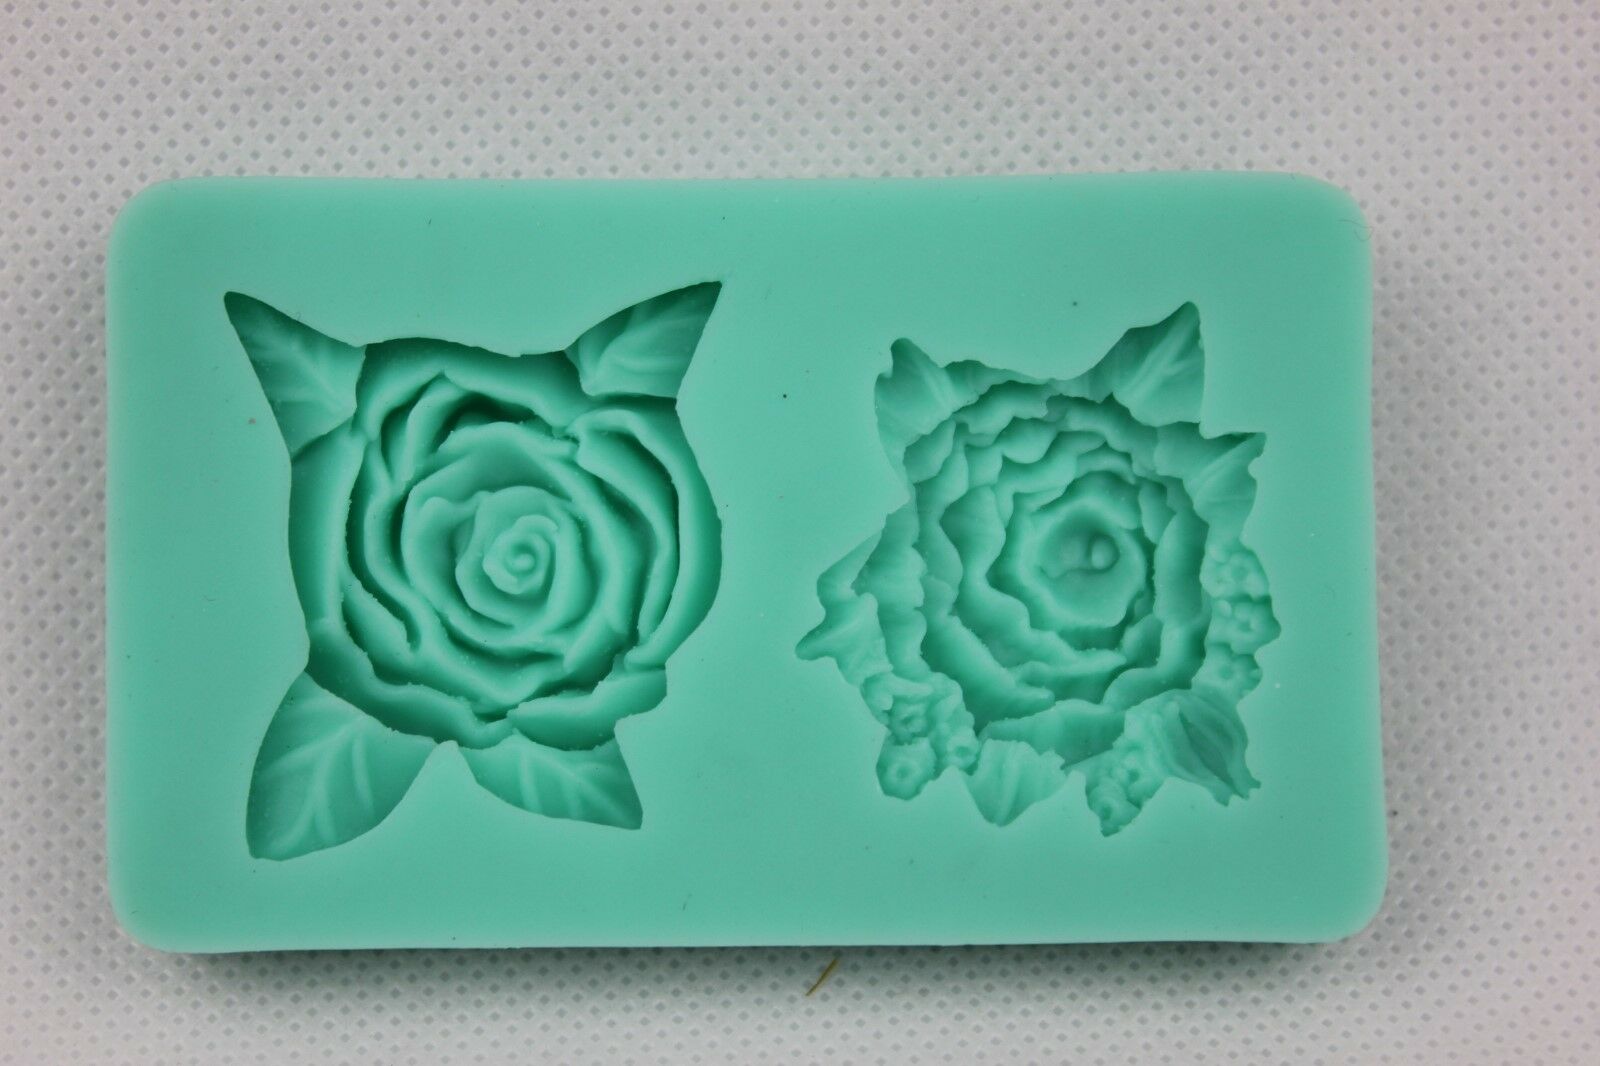 attachment-https://www.cupcakeaddicts.co.uk/wp-content/uploads/imported/1/Roses-Flower-Silicone-Double-Mould-Cake-Decor-Icing-Sugarpaste-Chocolate-Mould-D-323145236751.jpg